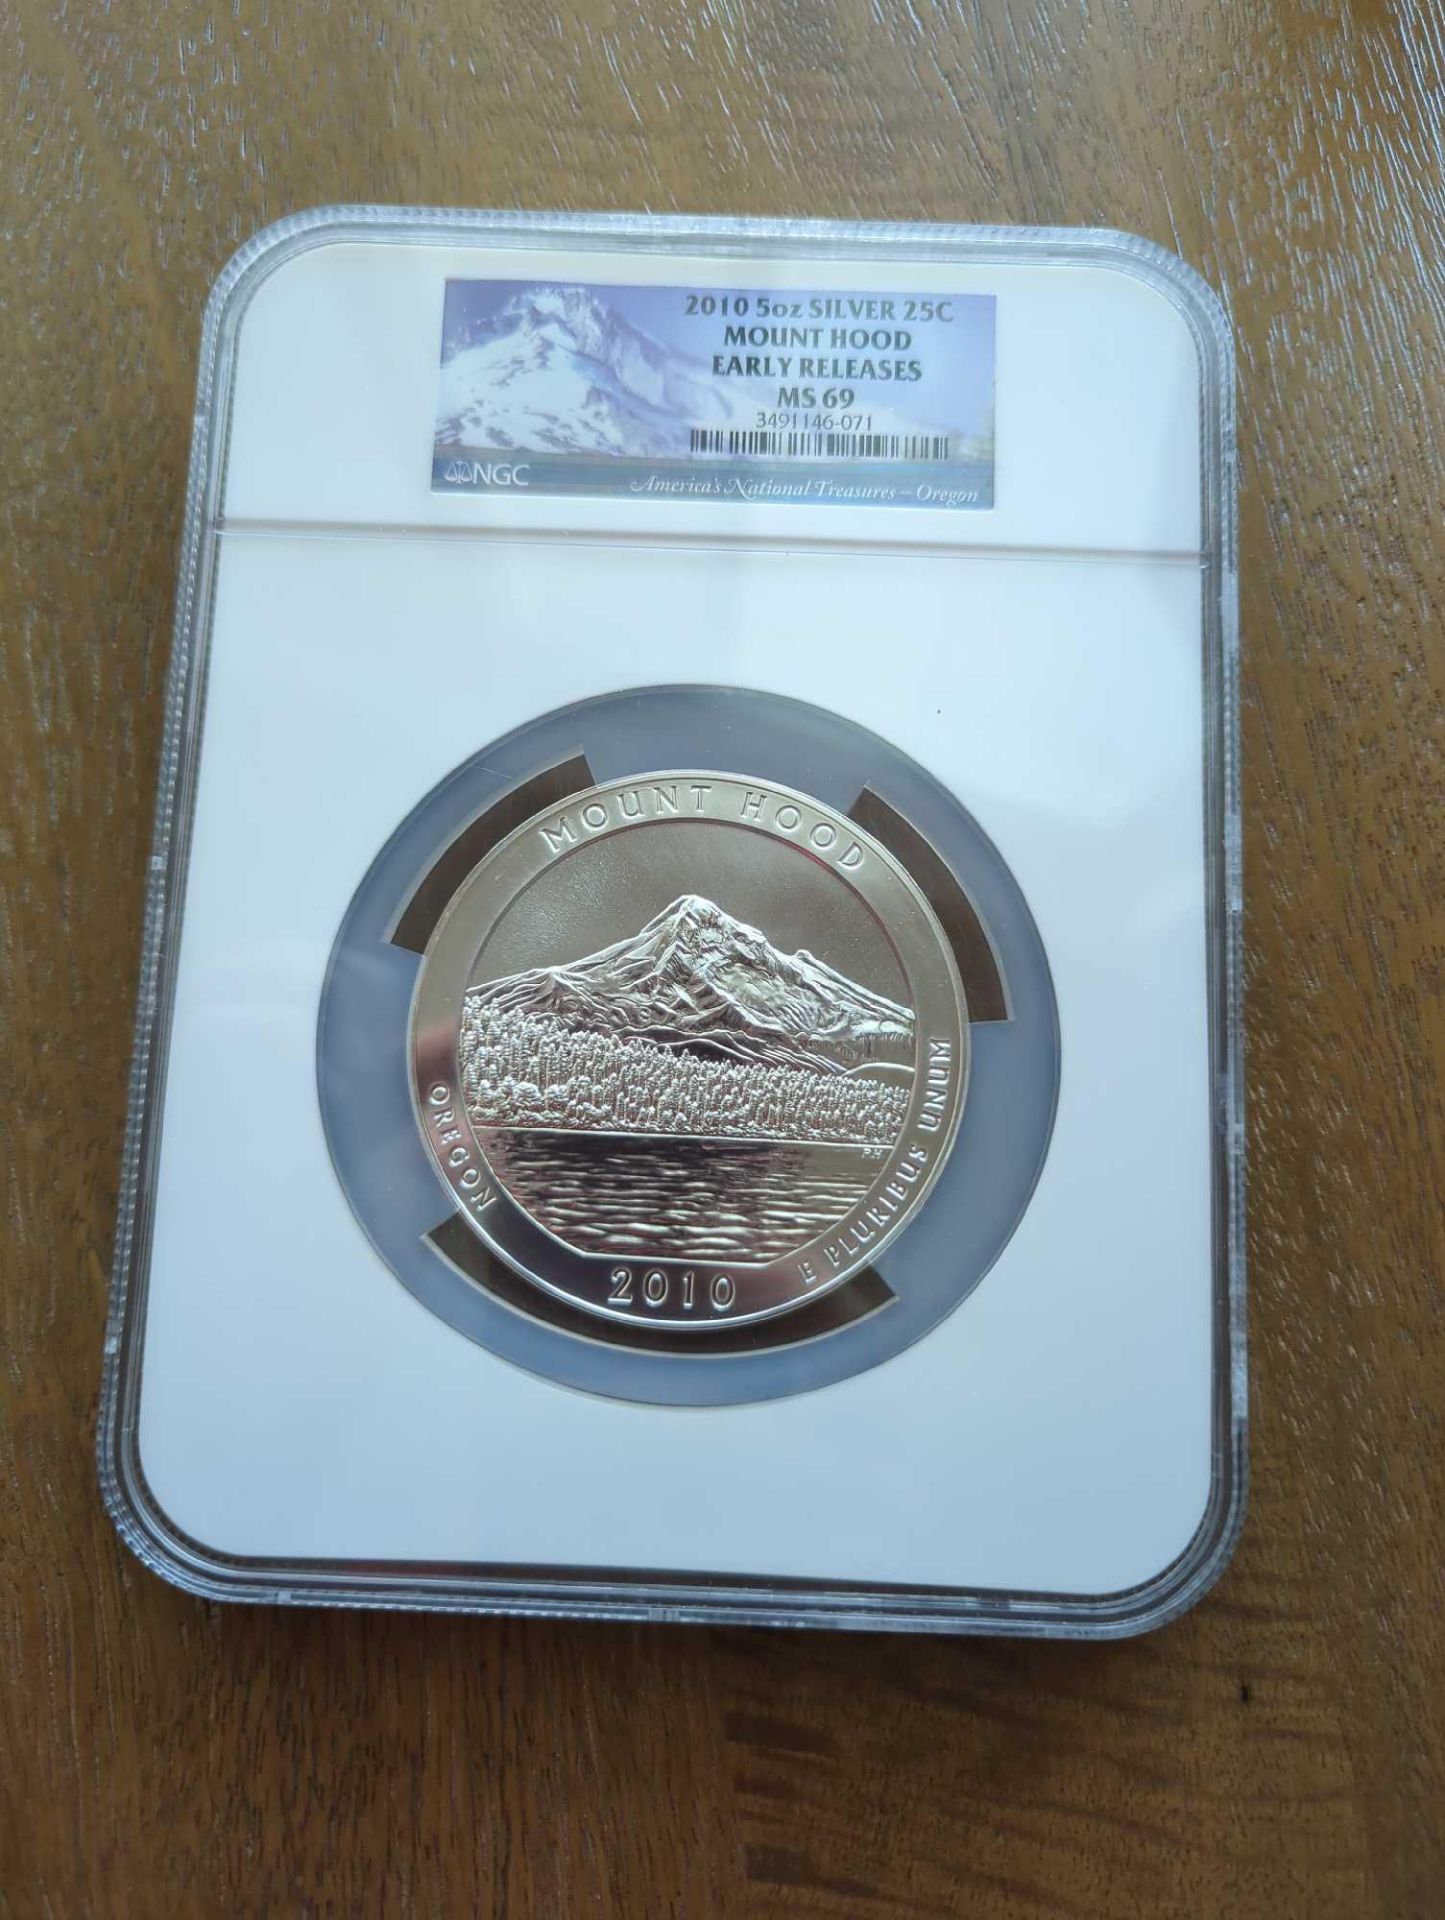 2010 5oz Silver 25c Mount Hood Early Releases MS 69 - Image 5 of 5